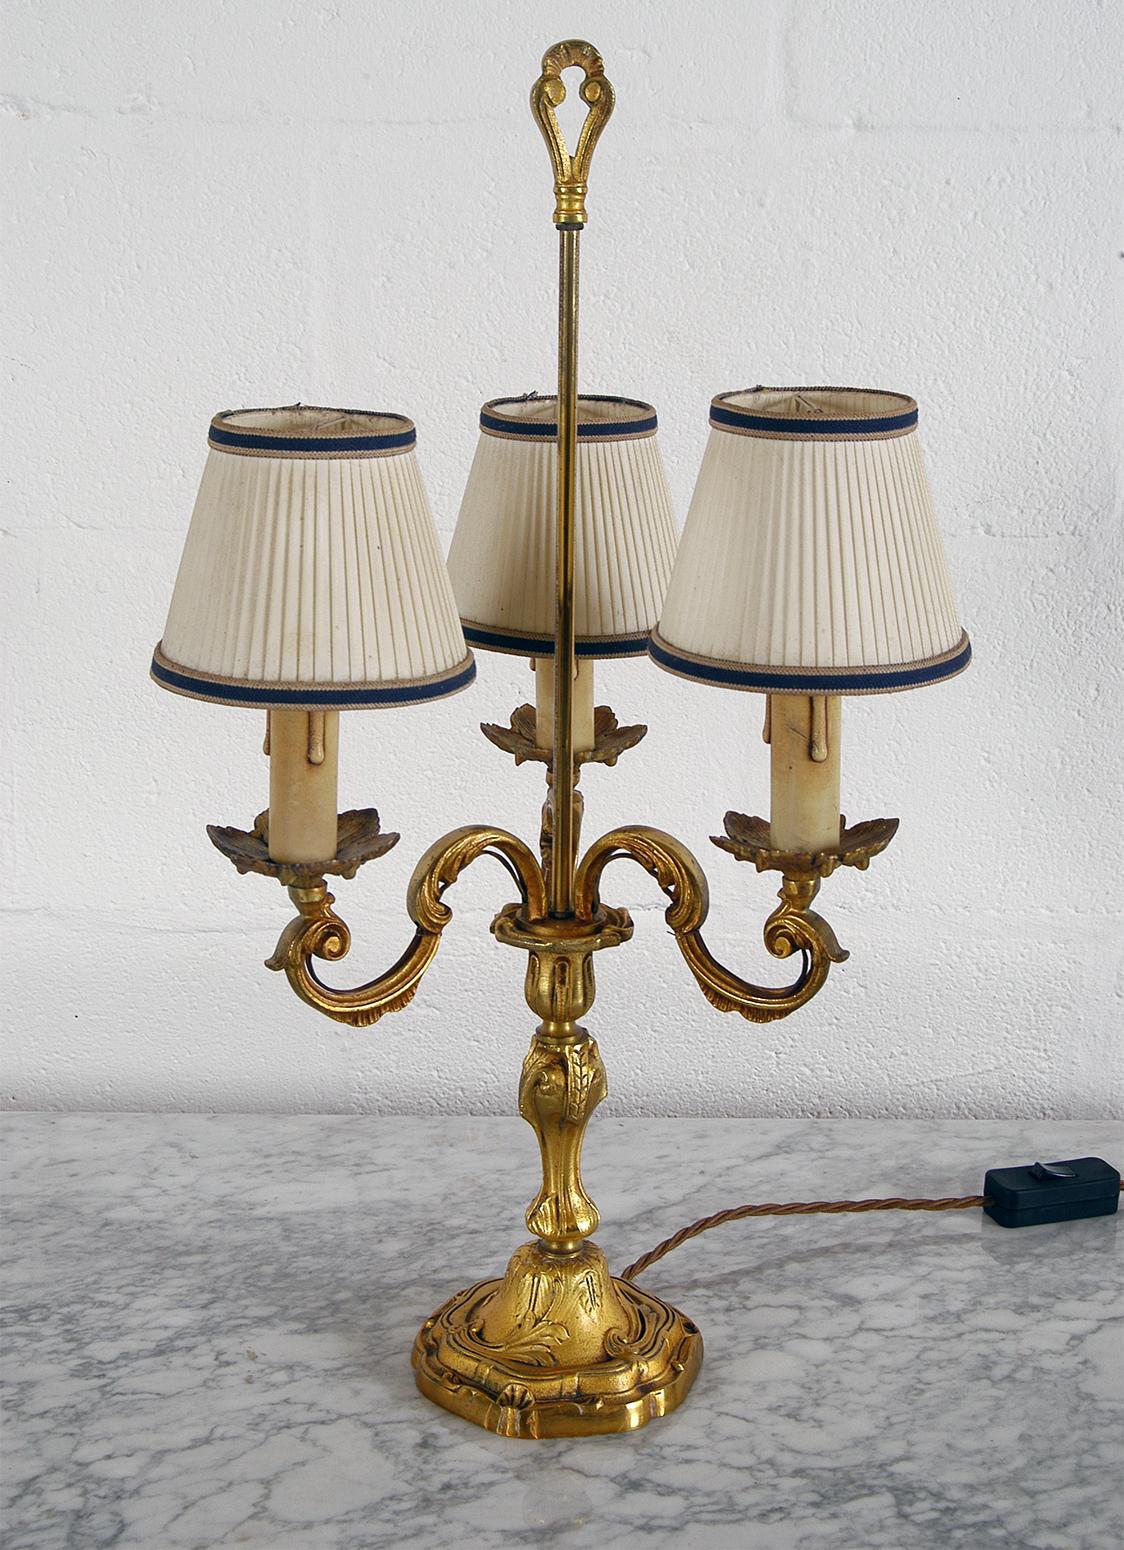 A mid-20th century French gilt brass three-arm table lamp, retains its original pressed card faux candles and is fitted with three individual chandelier shades.
The heavy brass base has a mark on the underside (L333 / 335) and has been gently